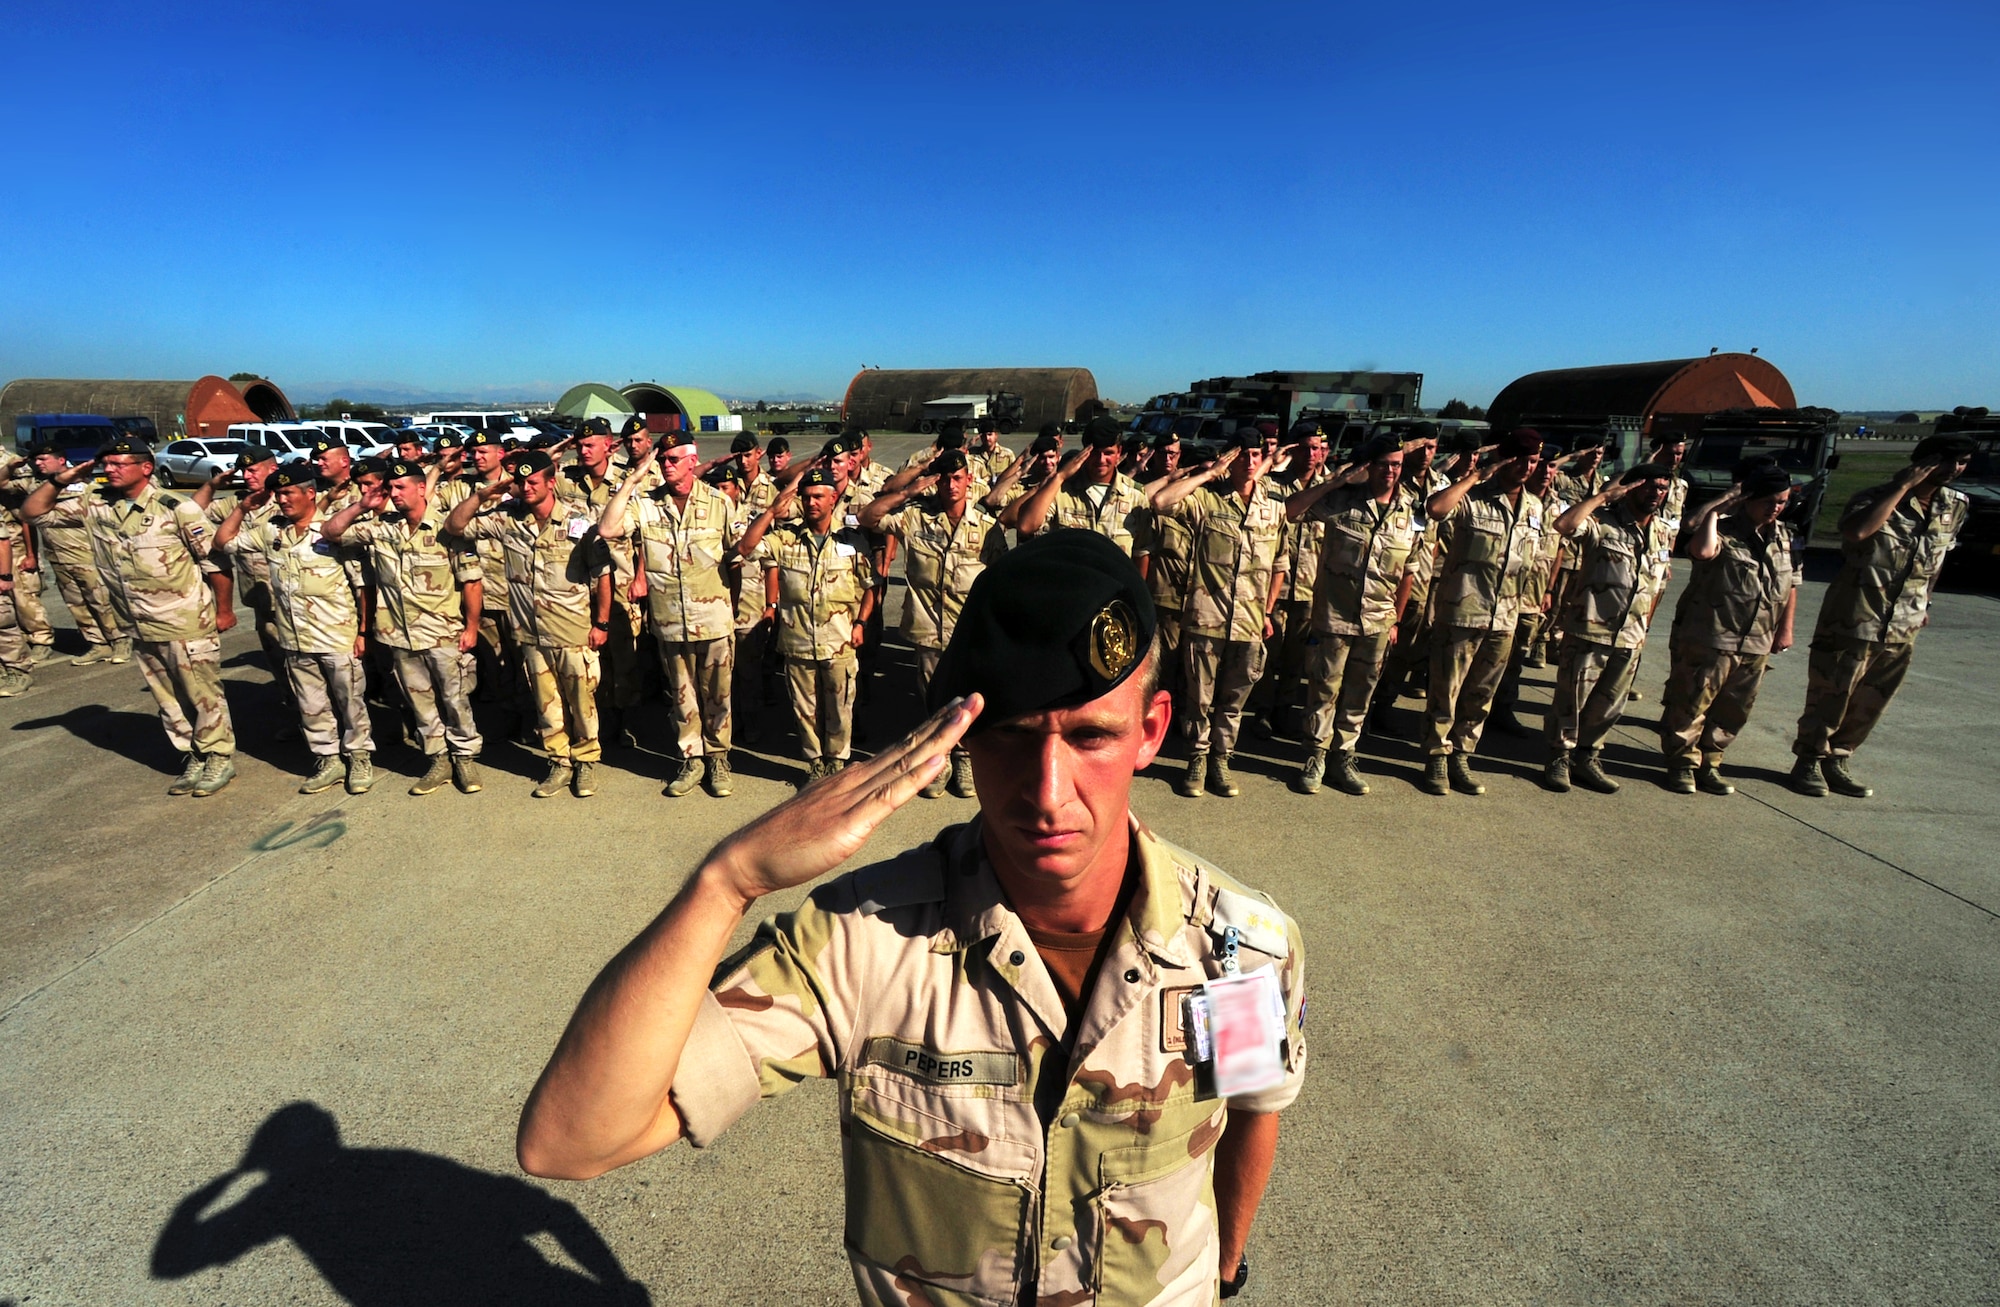 Royal Netherlands army Capt. Reijn Pepers, 1st Netherlands Ballistic Missile Defense Task Force chief of maintenance, salutes during a change of command ceremony in front of his unit Oct. 2, 2014, at Incirlik Air Base, Turkey. The Dutch forces were stationed at Incirlik AB for two years as part of the ongoing NATO mission Operation Active Fence. (U.S. Air Force photo by Senior Airman Nicole Sikorski/Released)